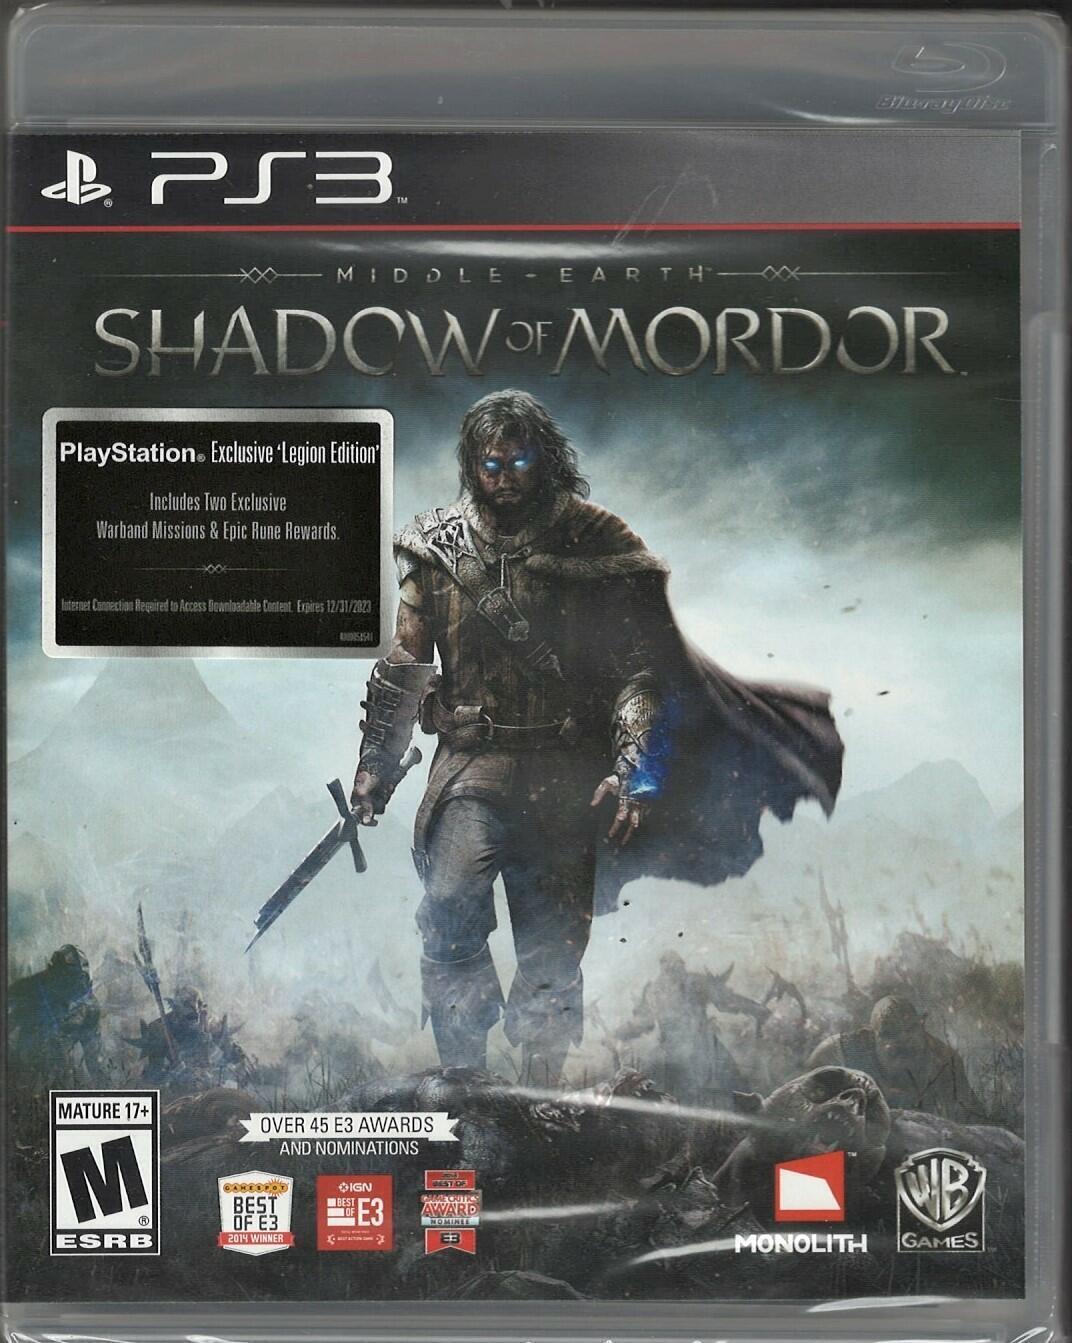 Middle-earth: Shadow of Mordor - IGN